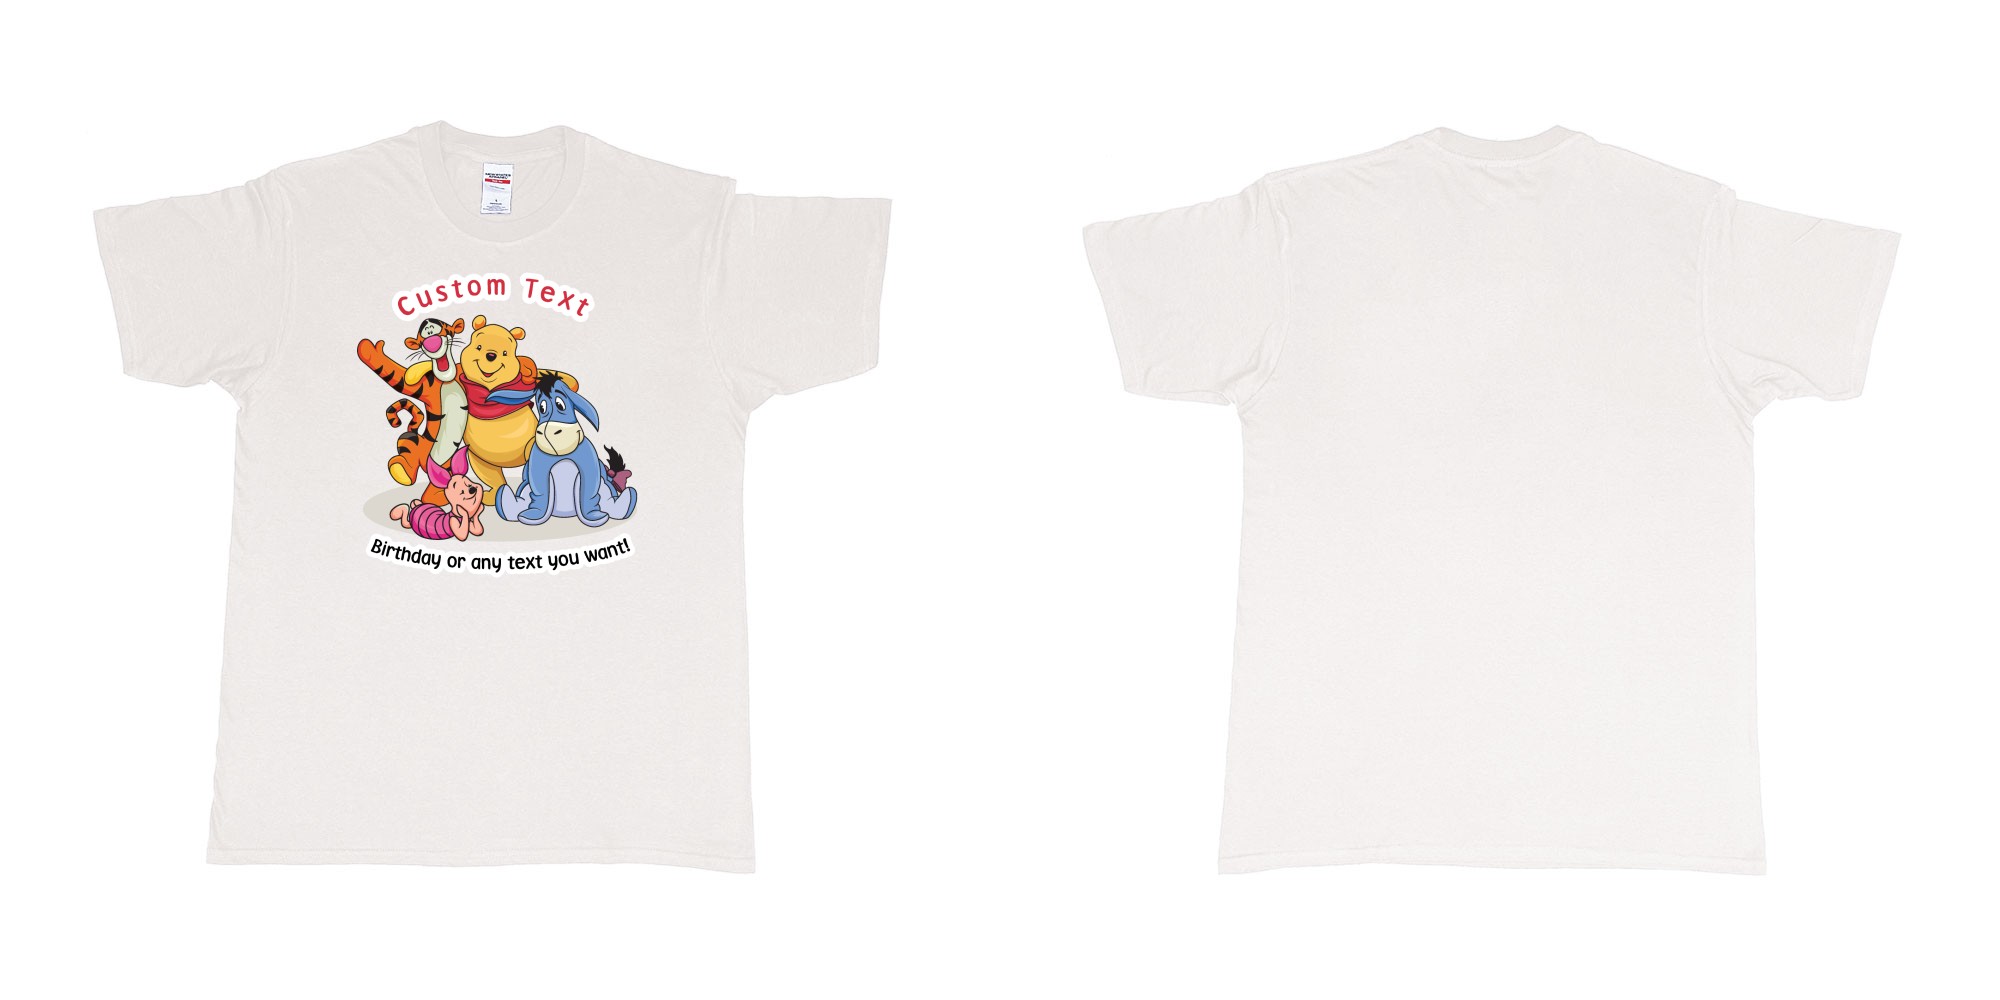 Custom tshirt design winnie the pooh and friend in fabric color white choice your own text made in Bali by The Pirate Way